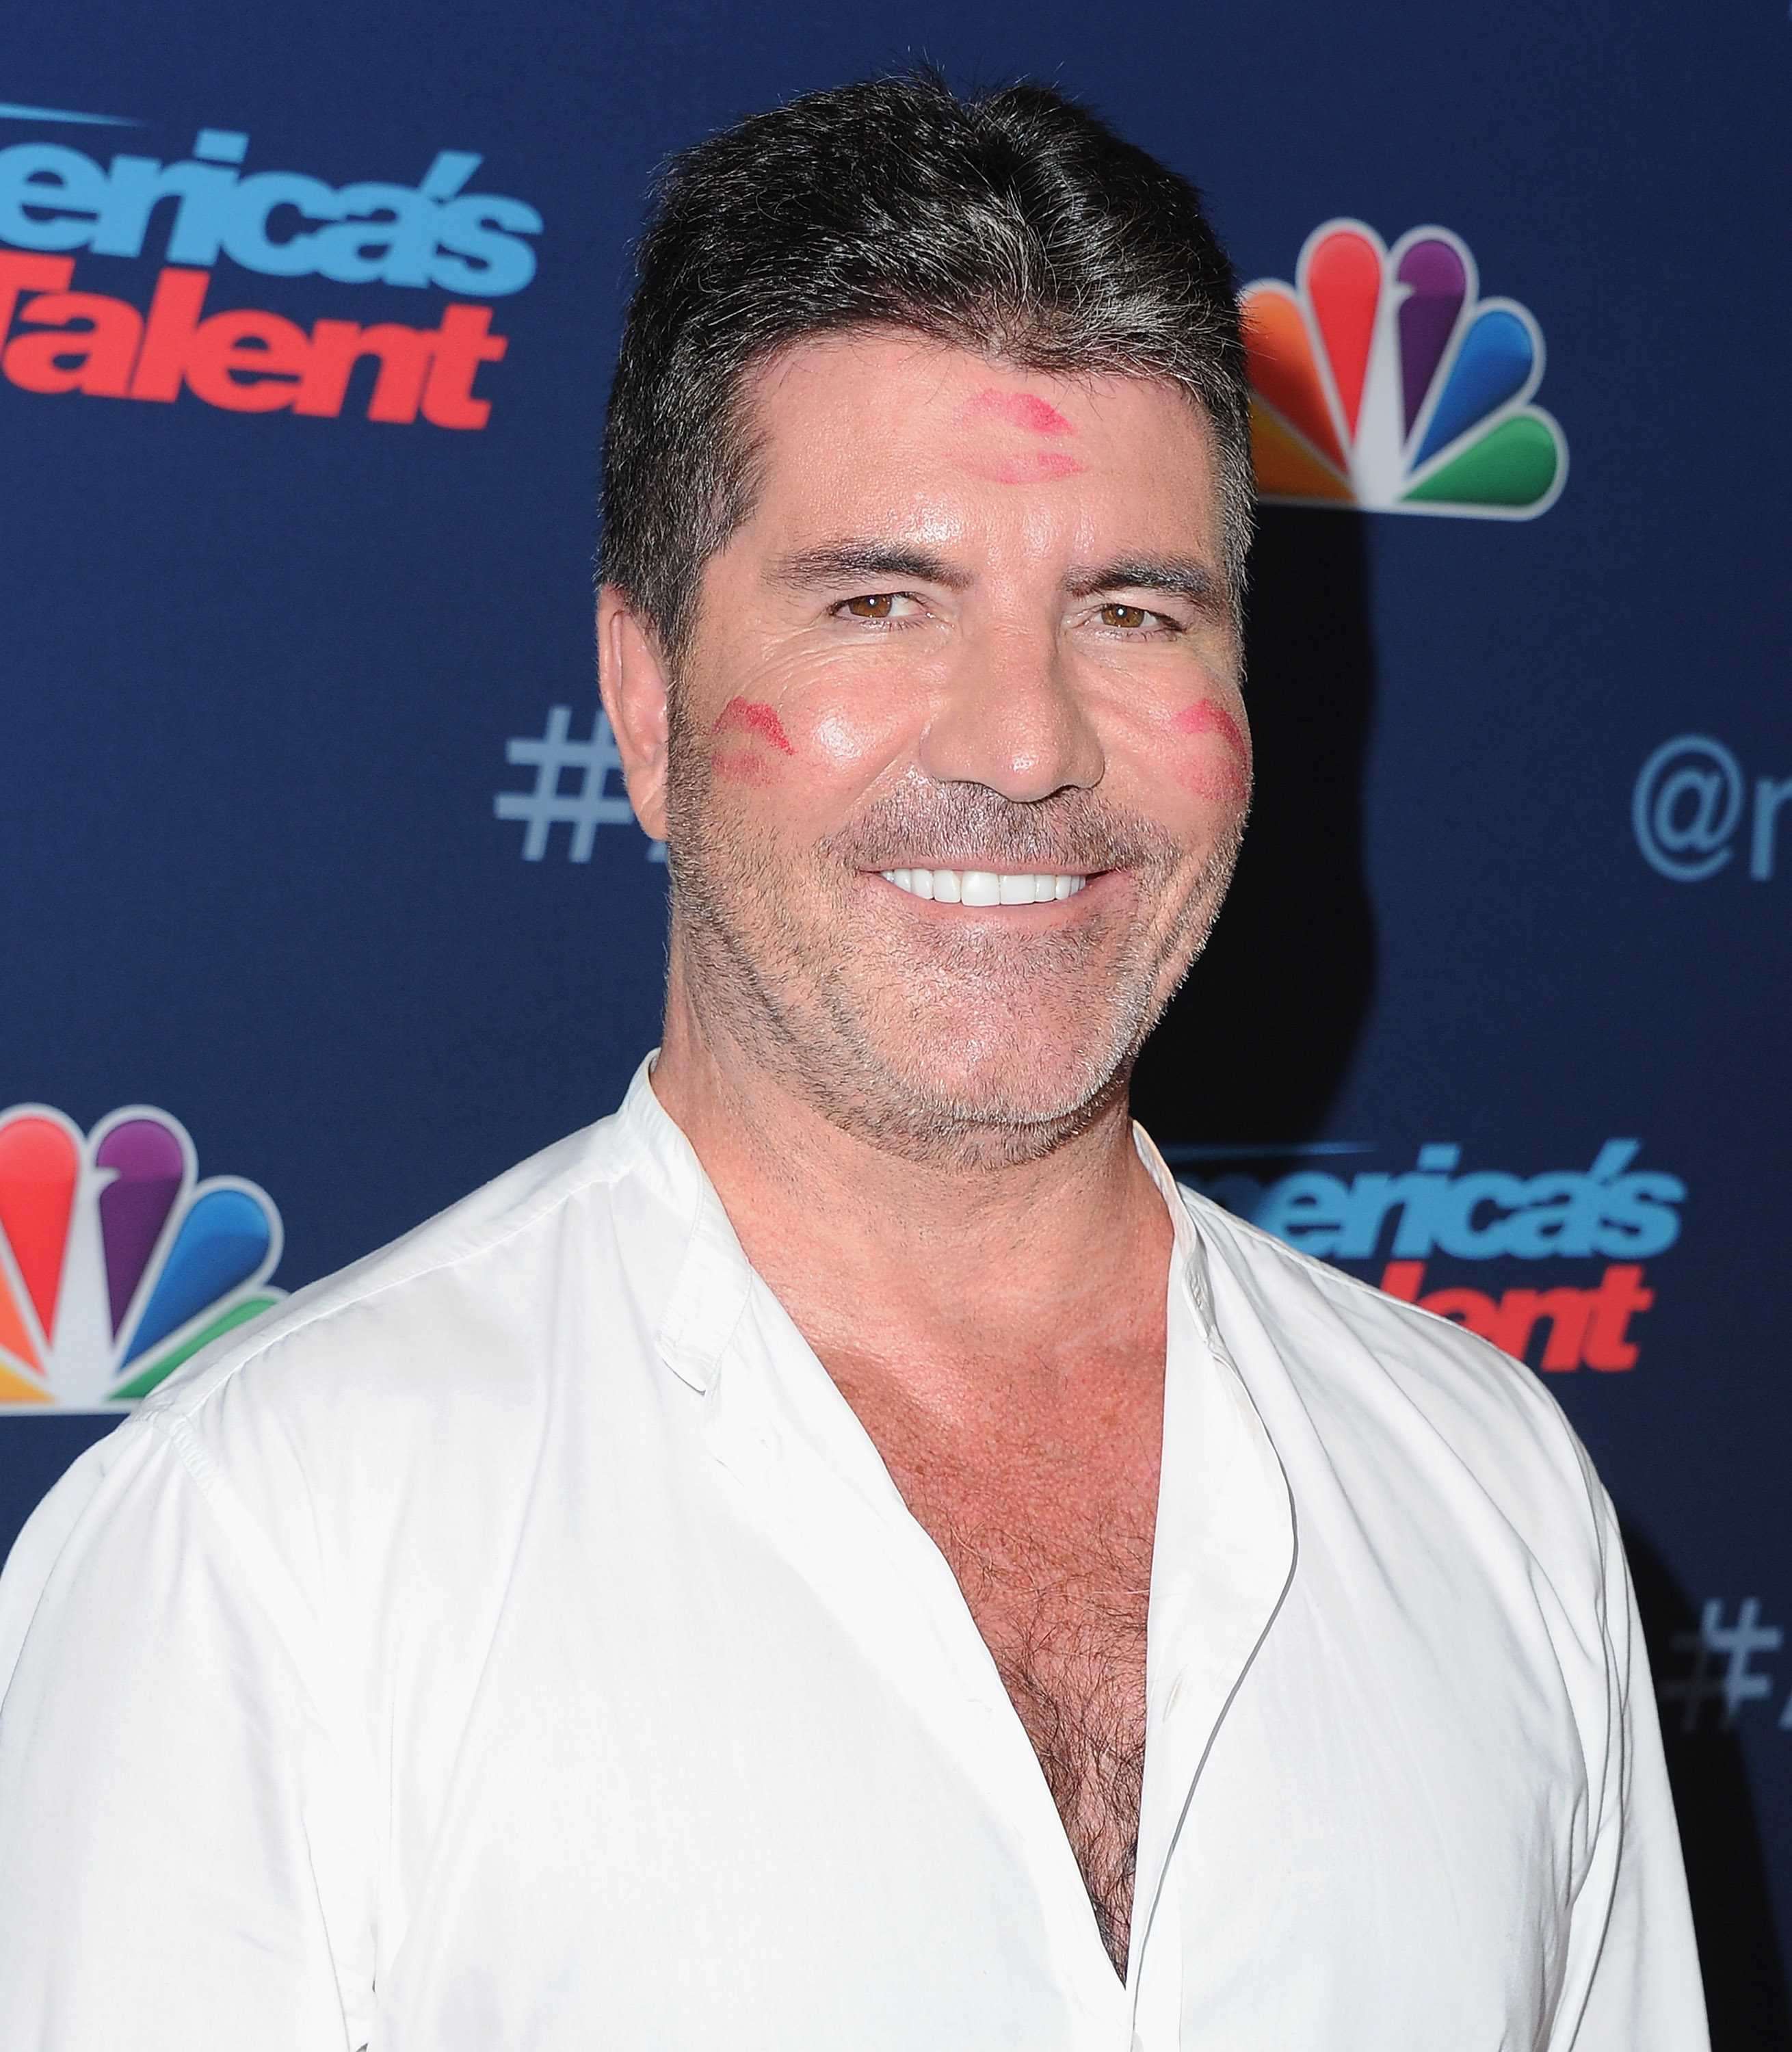 Simon Cowell arrives at "America's Got Talent" Season 11 Live Show at Dolby Theatre on August 30, 2016, in Hollywood, California. | Source: Getty Images